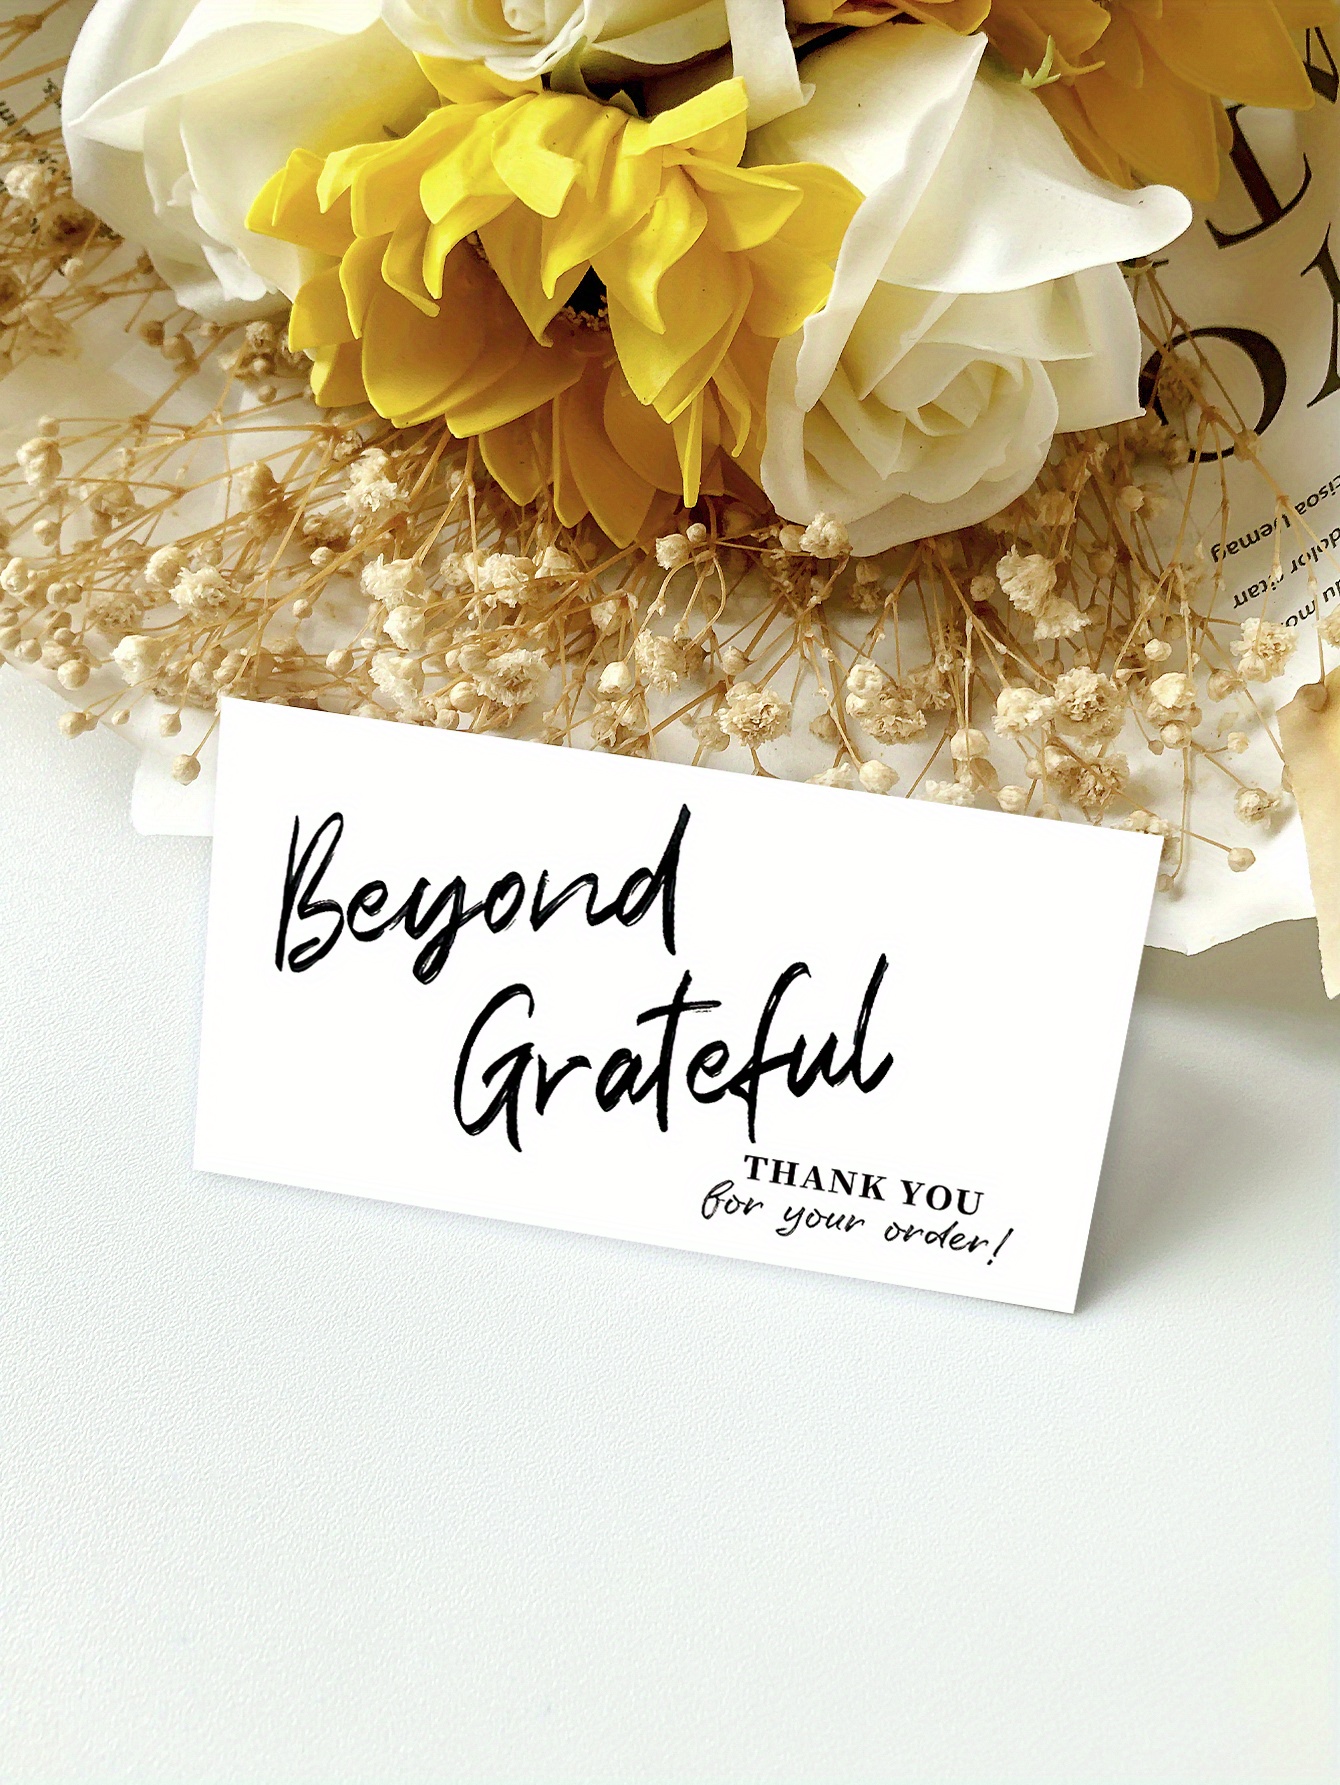 Business Thank You Cards - Small Business Essentials - When You